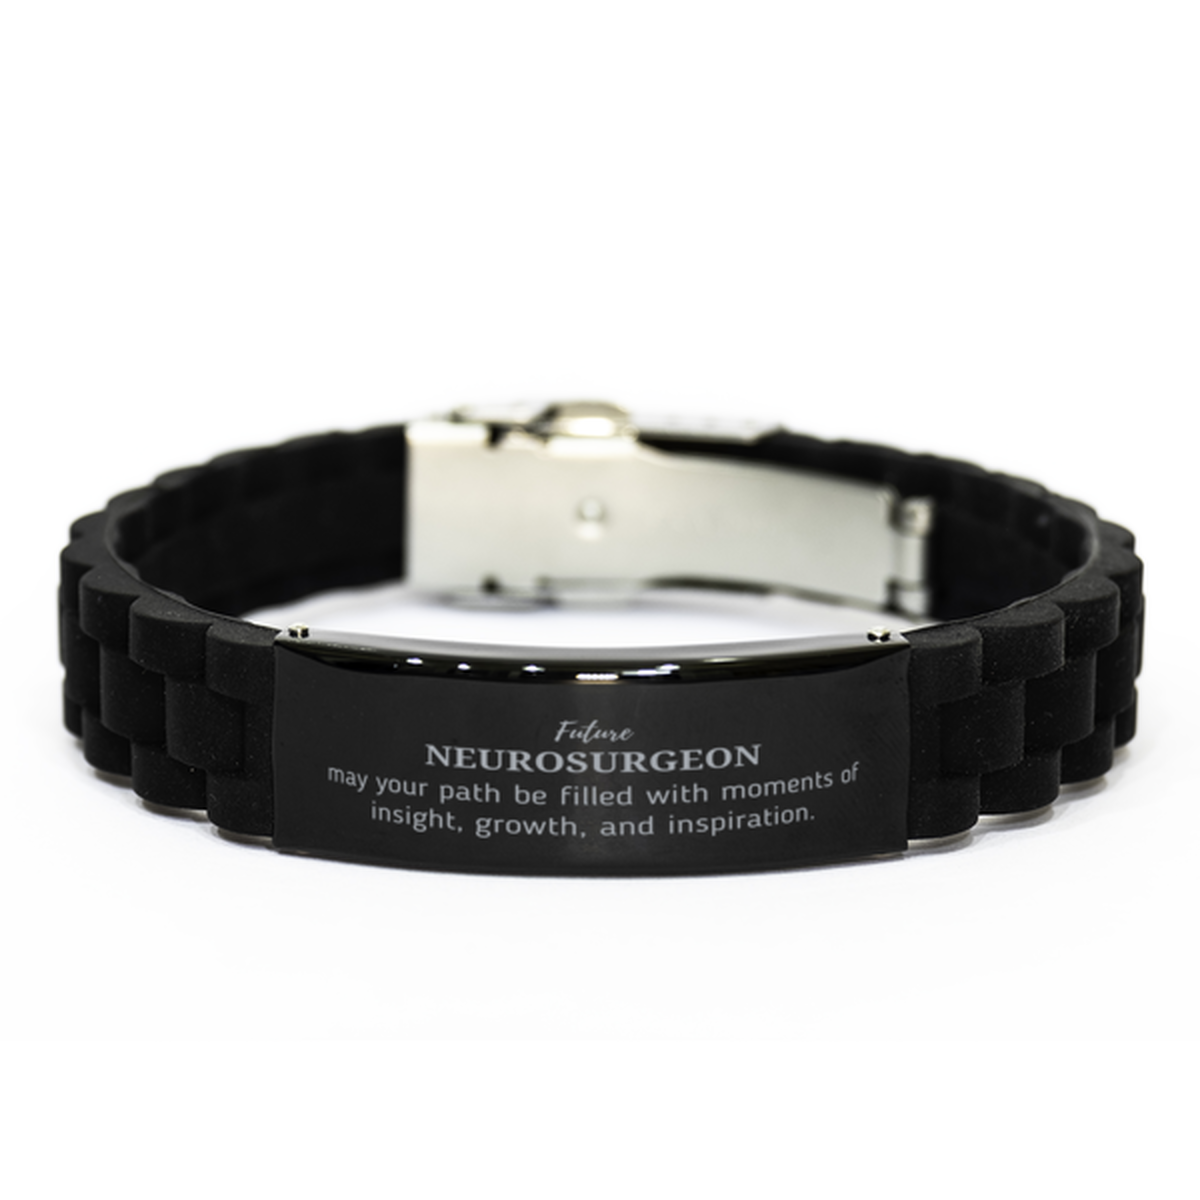 Future Neurosurgeon Gifts, May your path be filled with moments of insight, Graduation Gifts for New Neurosurgeon, Christmas Unique Black Glidelock Clasp Bracelet For Men, Women, Friends